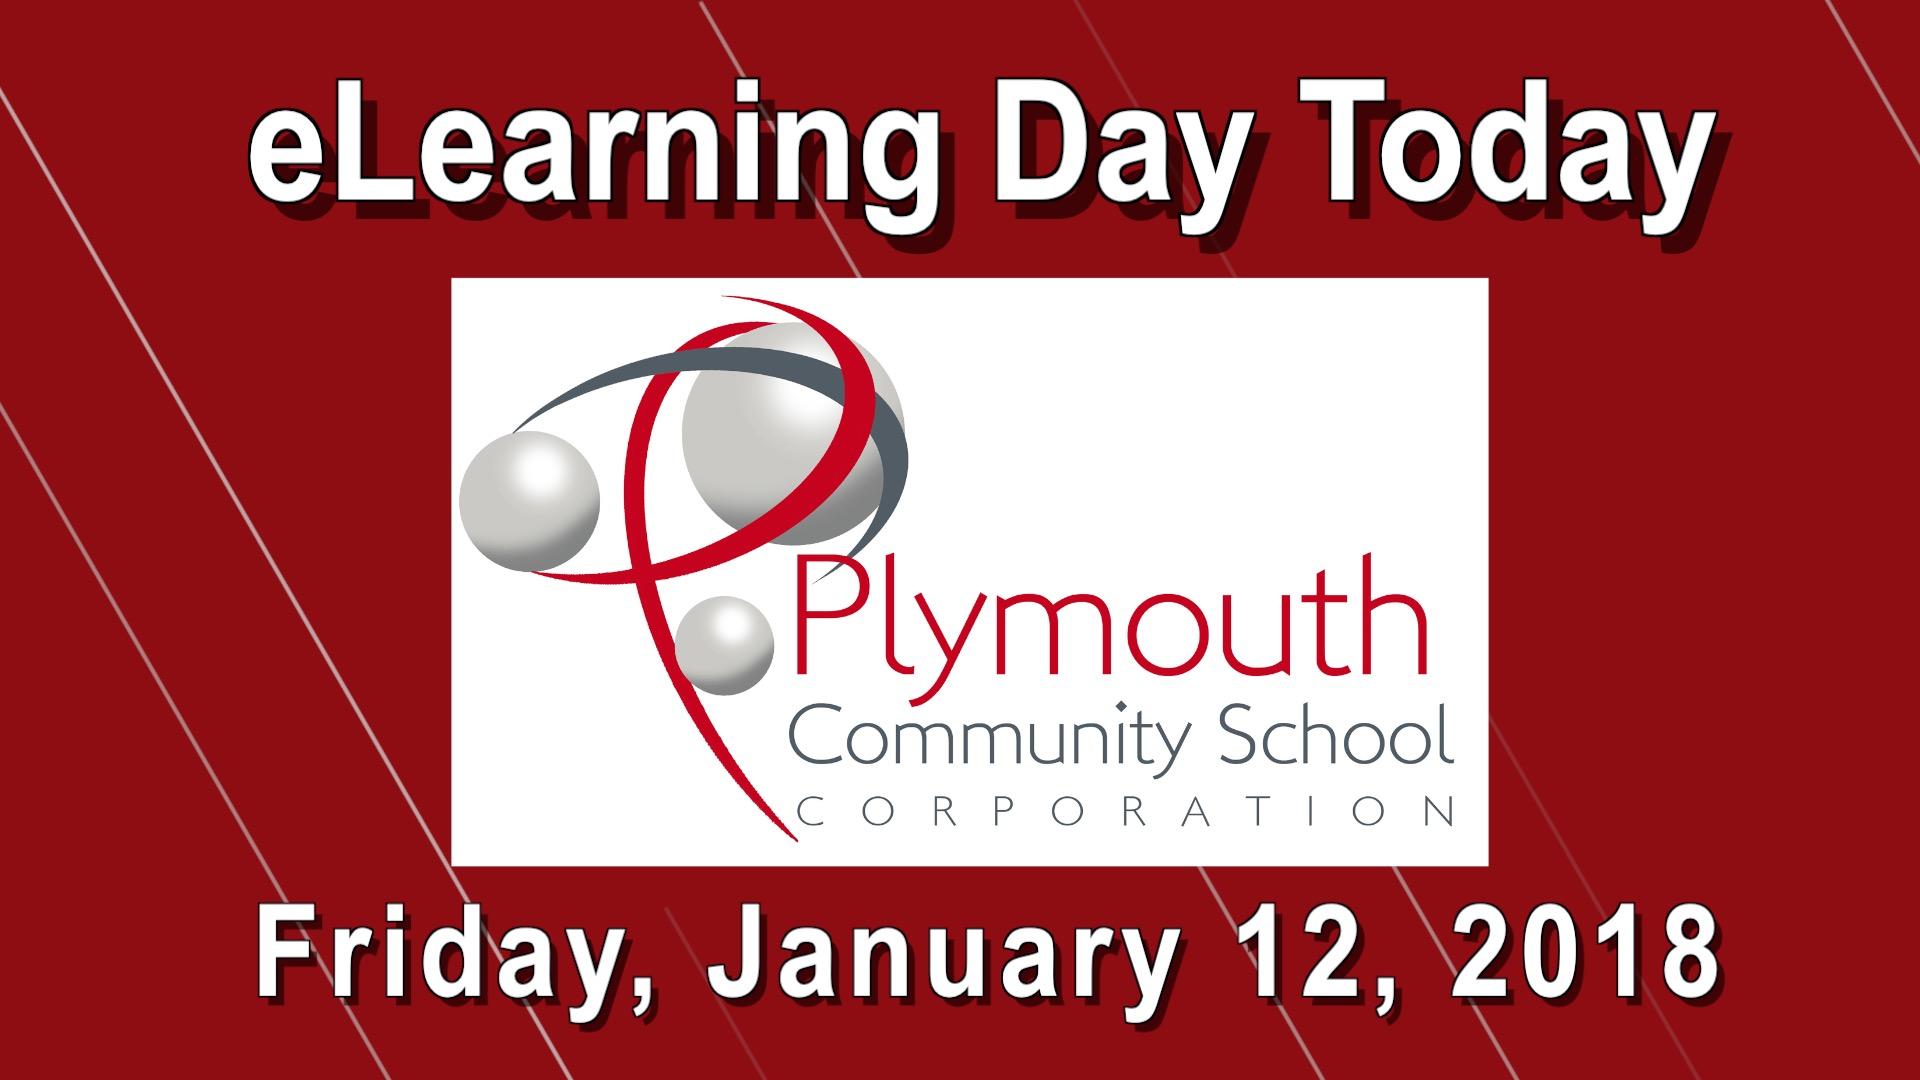 eLearning Day on Friday, January 12, 2018